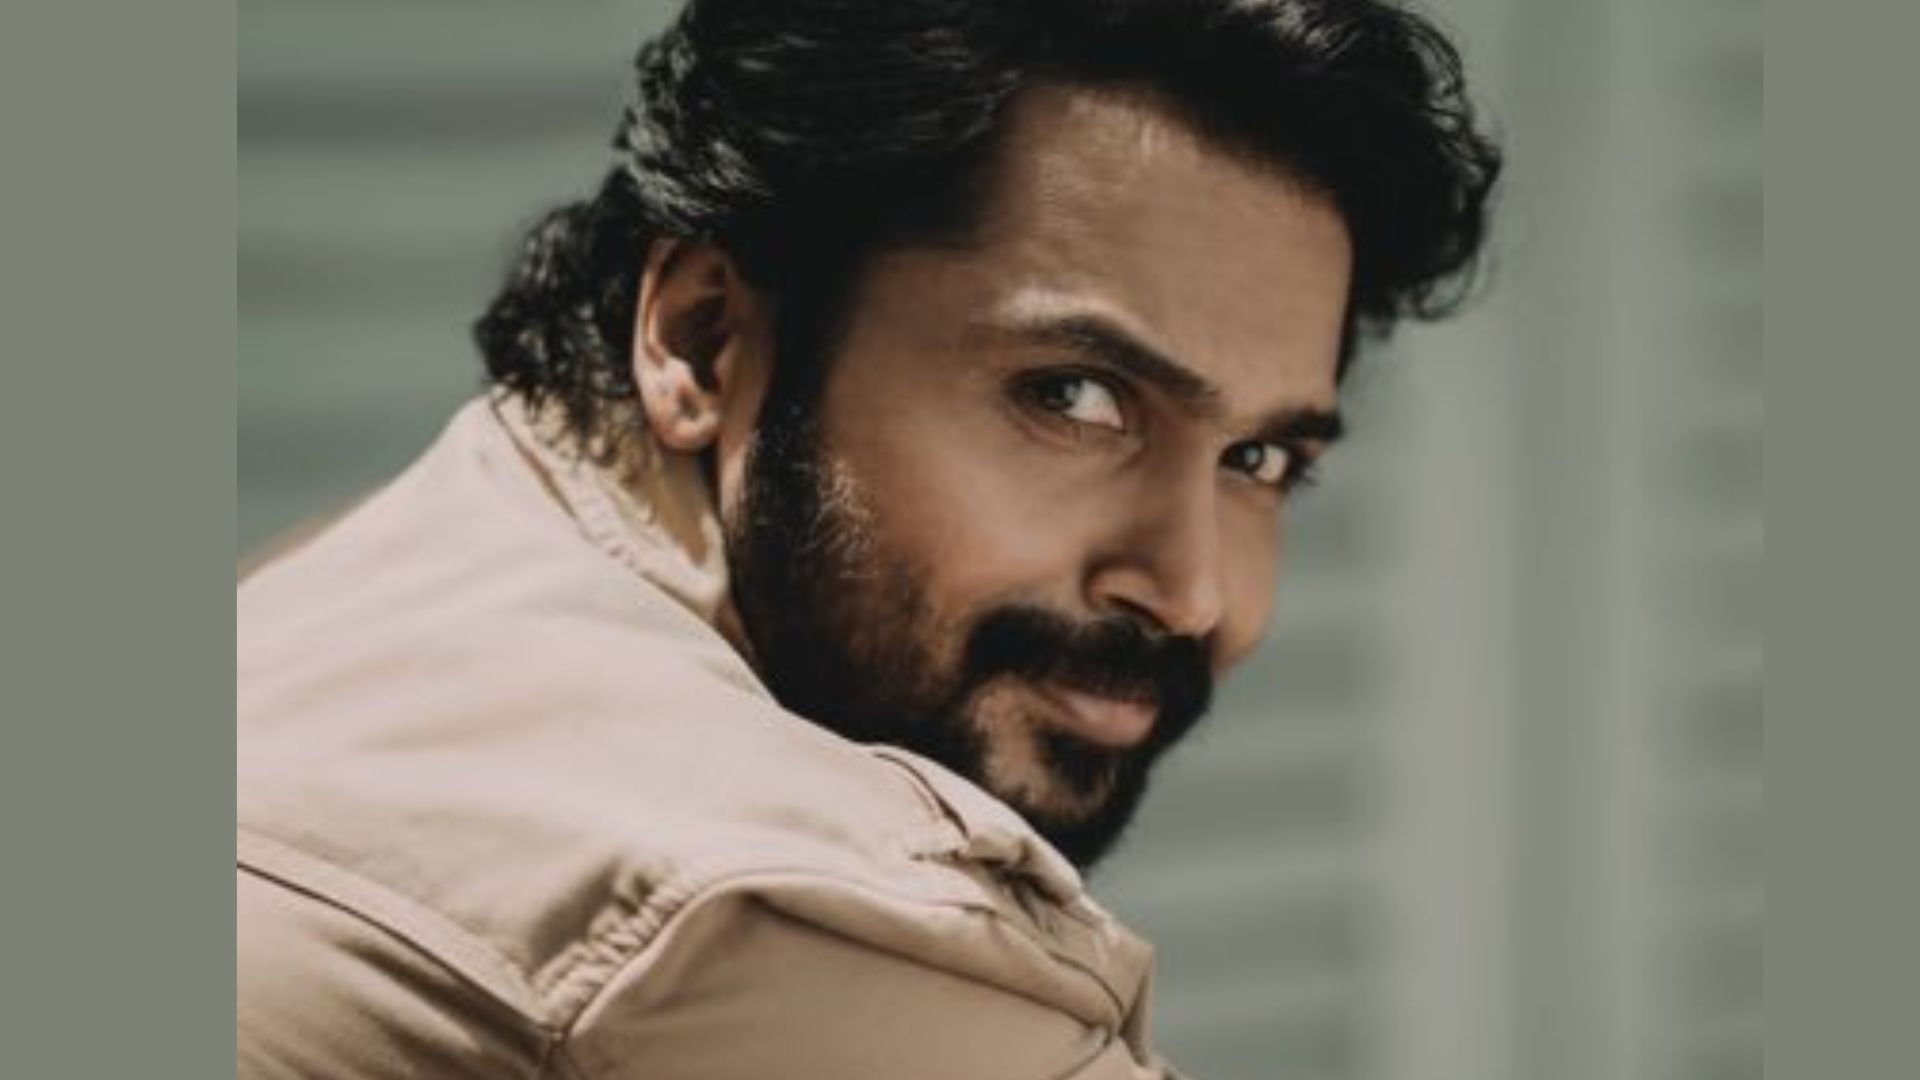 The unveiling of the First Look of Karthi's 27th film showcases the title as Meiyazhagan.